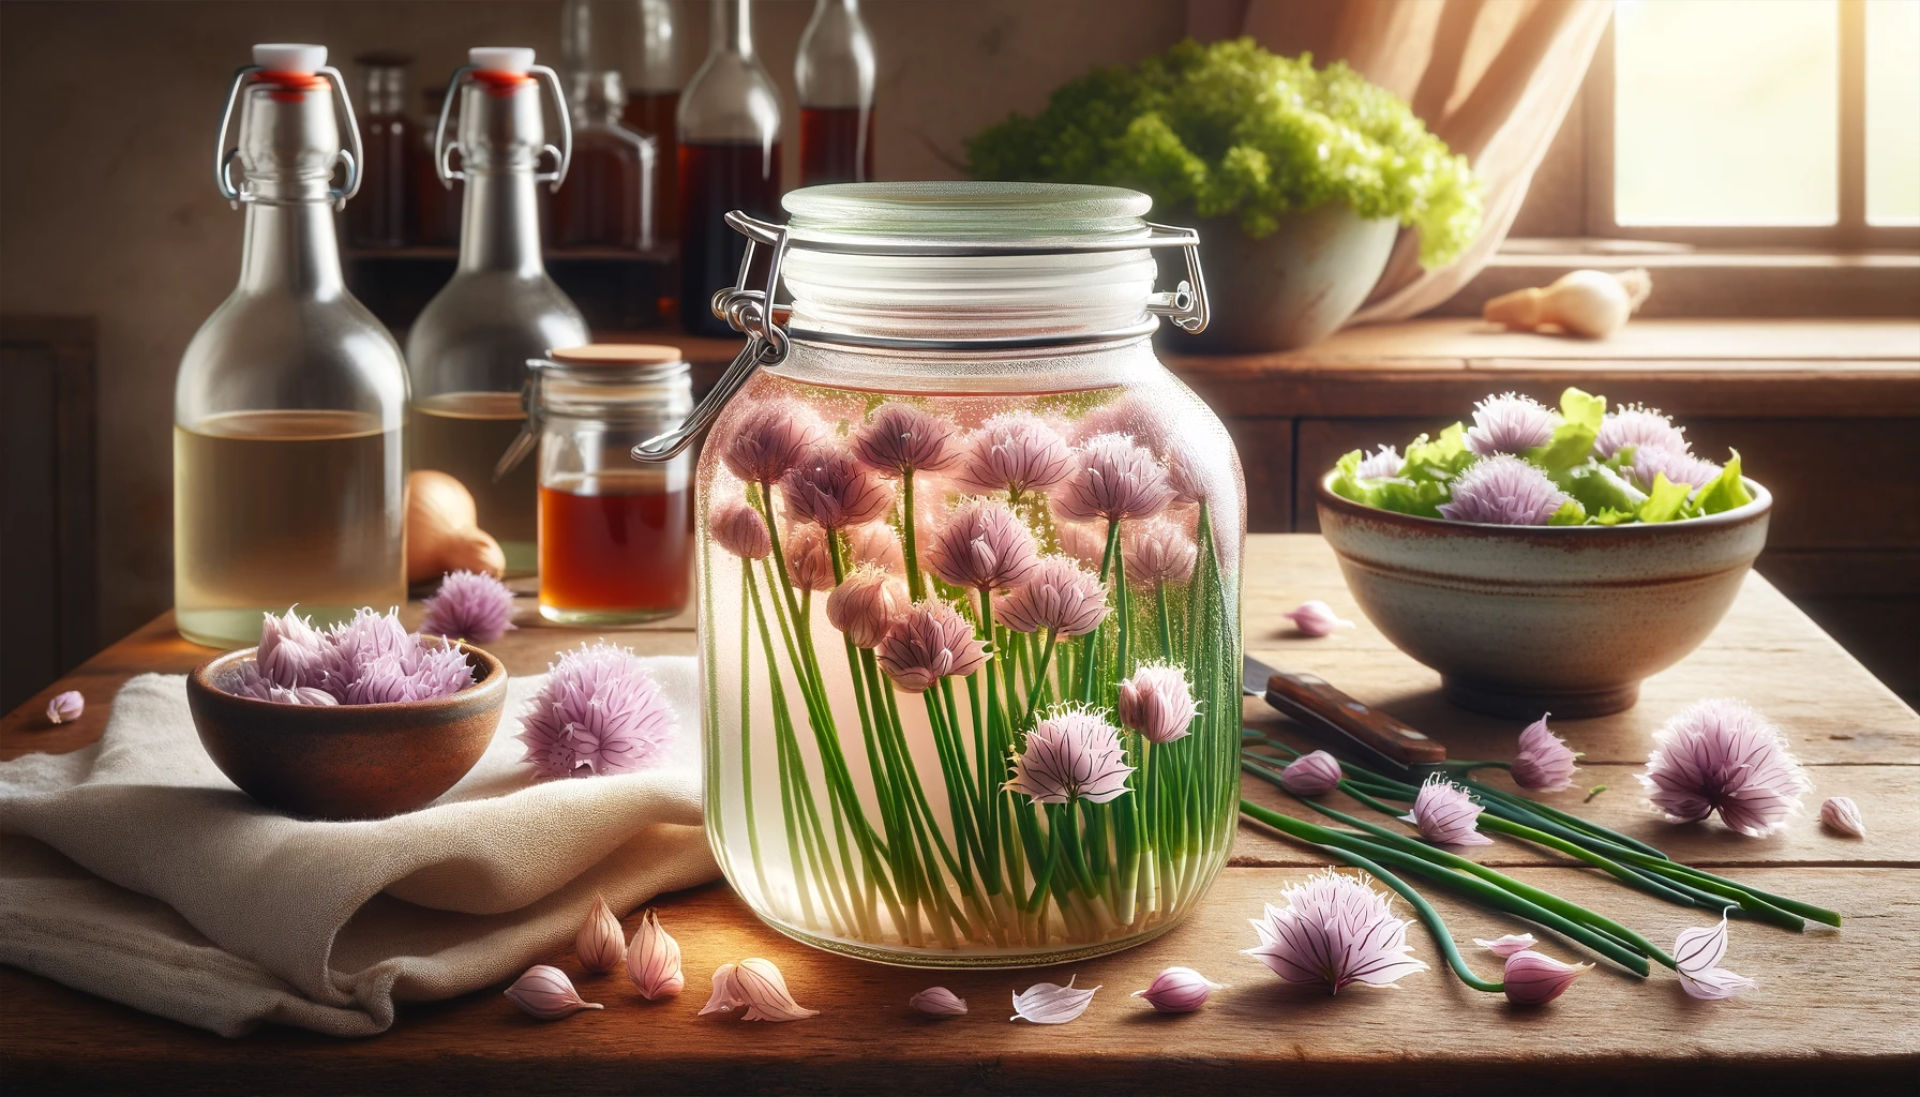 A high-definition image showcasing a jar filled with chive blossoms submerged in vinegar, set on a rustic kitchen counter. The jar is transparent, revealing the light pink hue of the vinegar. Around the jar, scattered chive blossoms and a small bowl of salad dressed with this vinegar are visible. The setting has a warm, inviting ambiance, with soft, natural lighting, emphasising the artisanal and homemade quality of the chive blossom vinegar. 